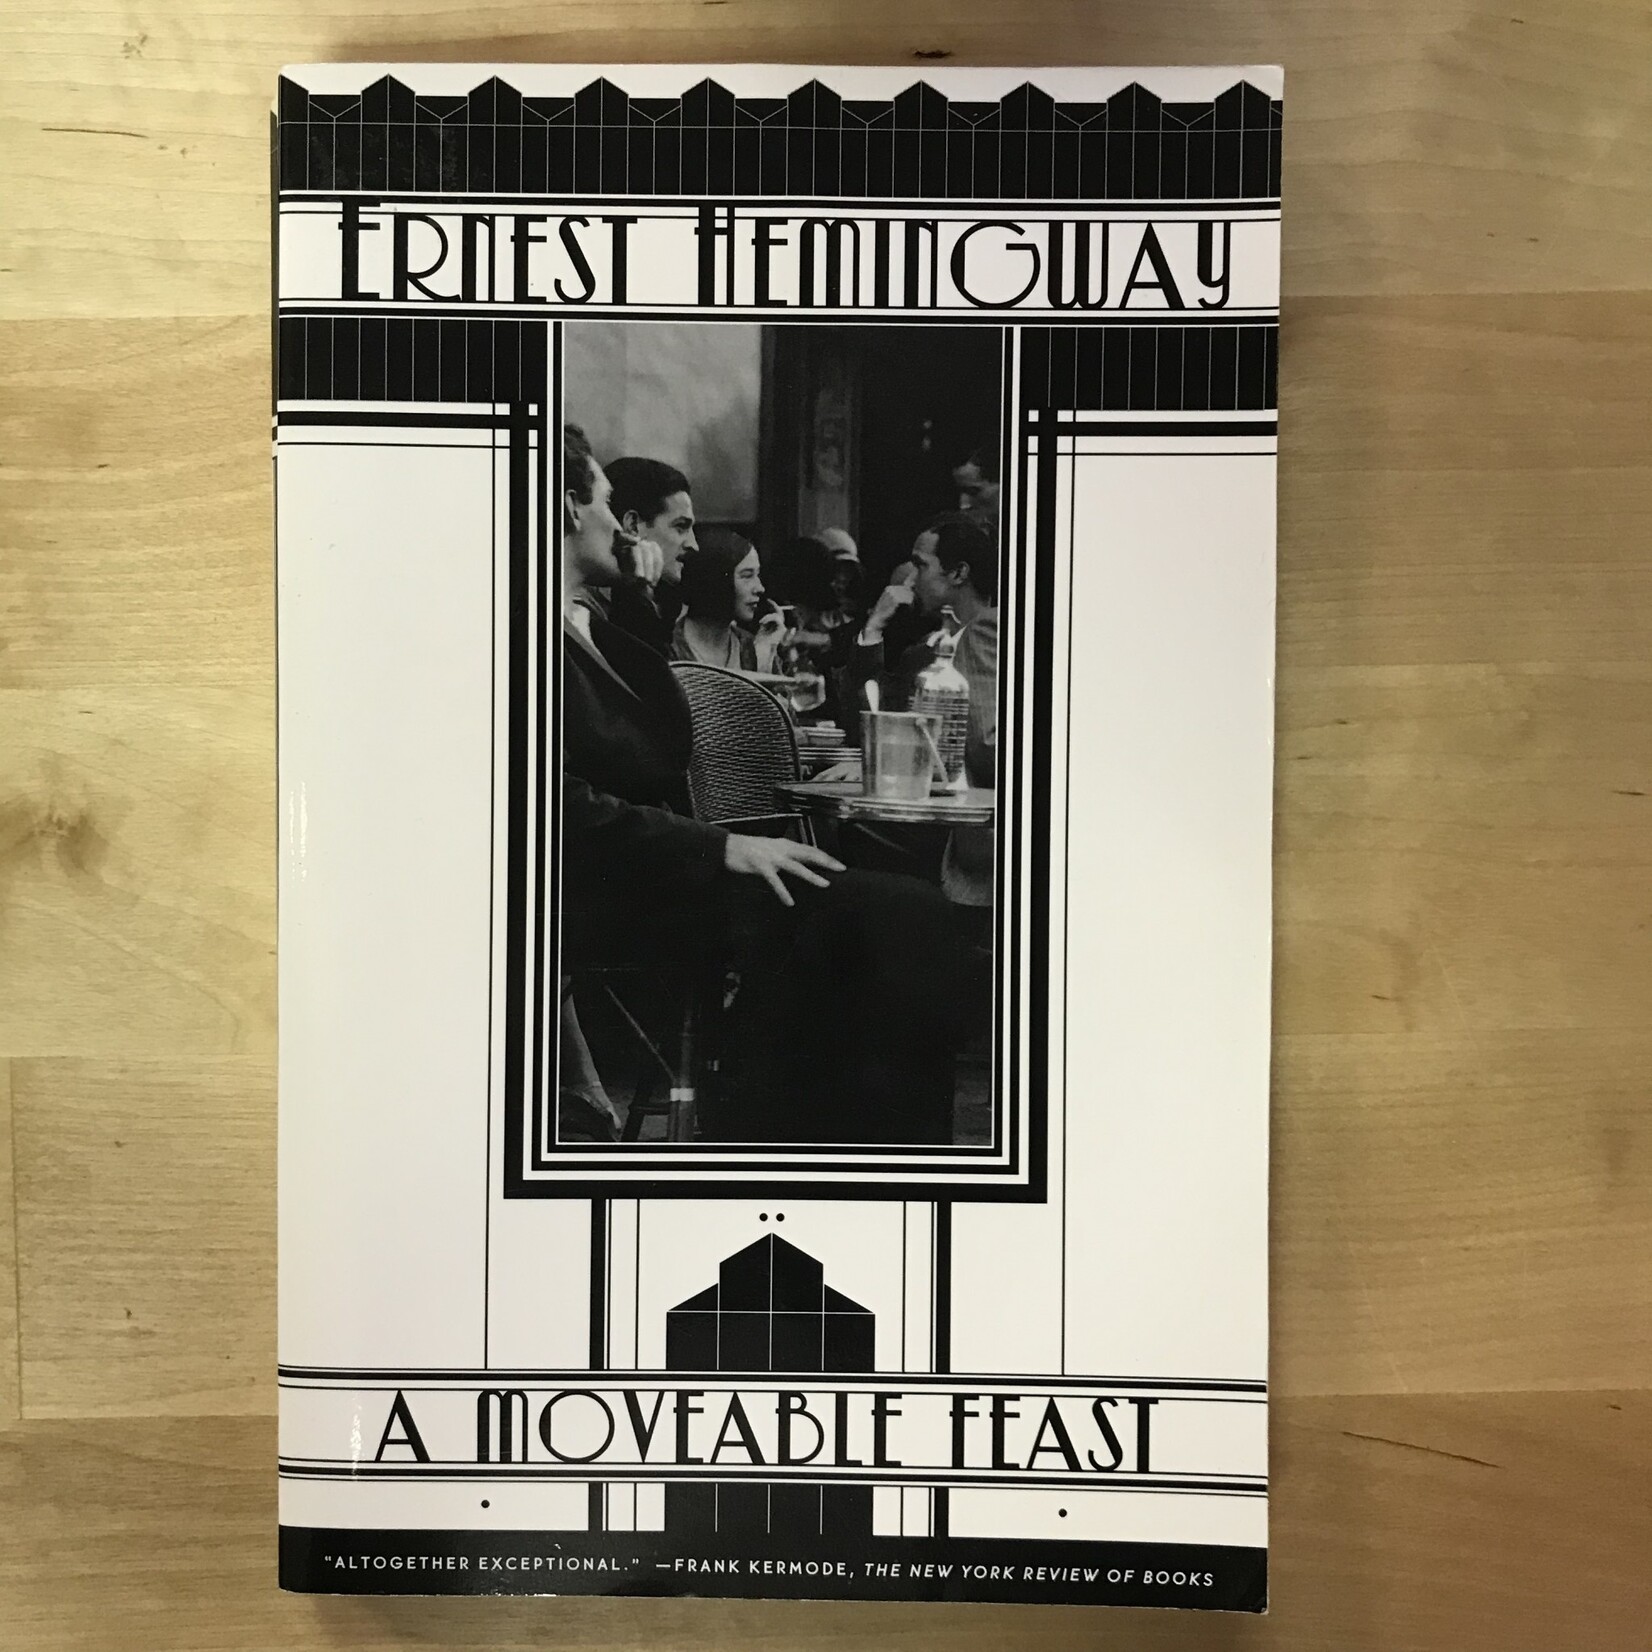 Ernest Hemingway - A Moveable Feast (1992) - Paperback (USED)